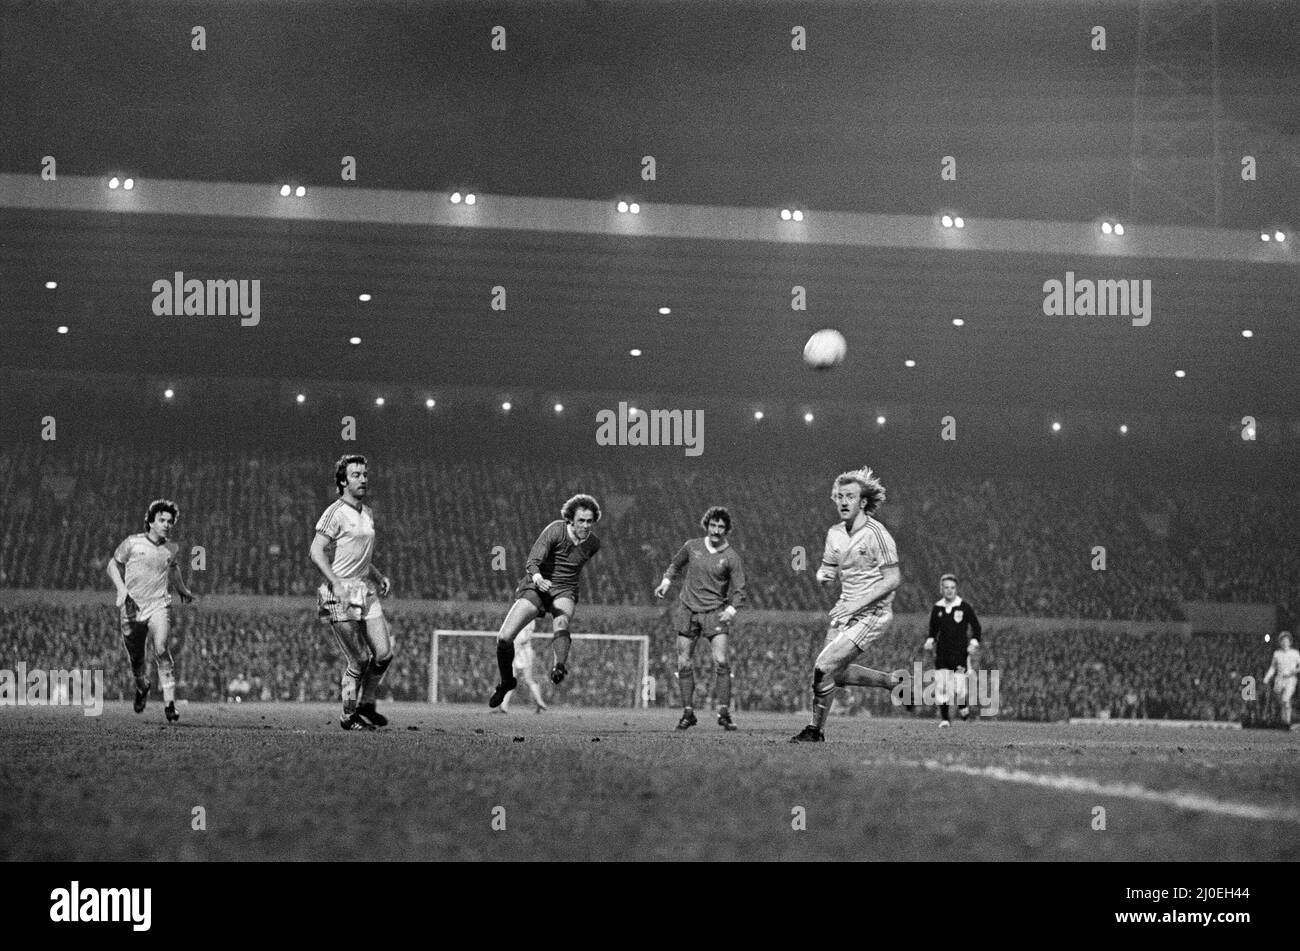 The 1978 Football League Cup Final was the eighteenth League Cup final, and was contested between Liverpool and Nottingham Forest. The initial match resulted in a 0?0 draw at Wembley Stadium on 18 March 1978. The replay was four days later at Old Trafford, and saw John Robertson score from the penalty spot after a foul by Phil Thompson on John O'Hare, which TV replays confirmed was actually outside the penalty area.(Picture) Phil Neal (centre) has a shot on goal. 22nd March 1978 Stock Photo